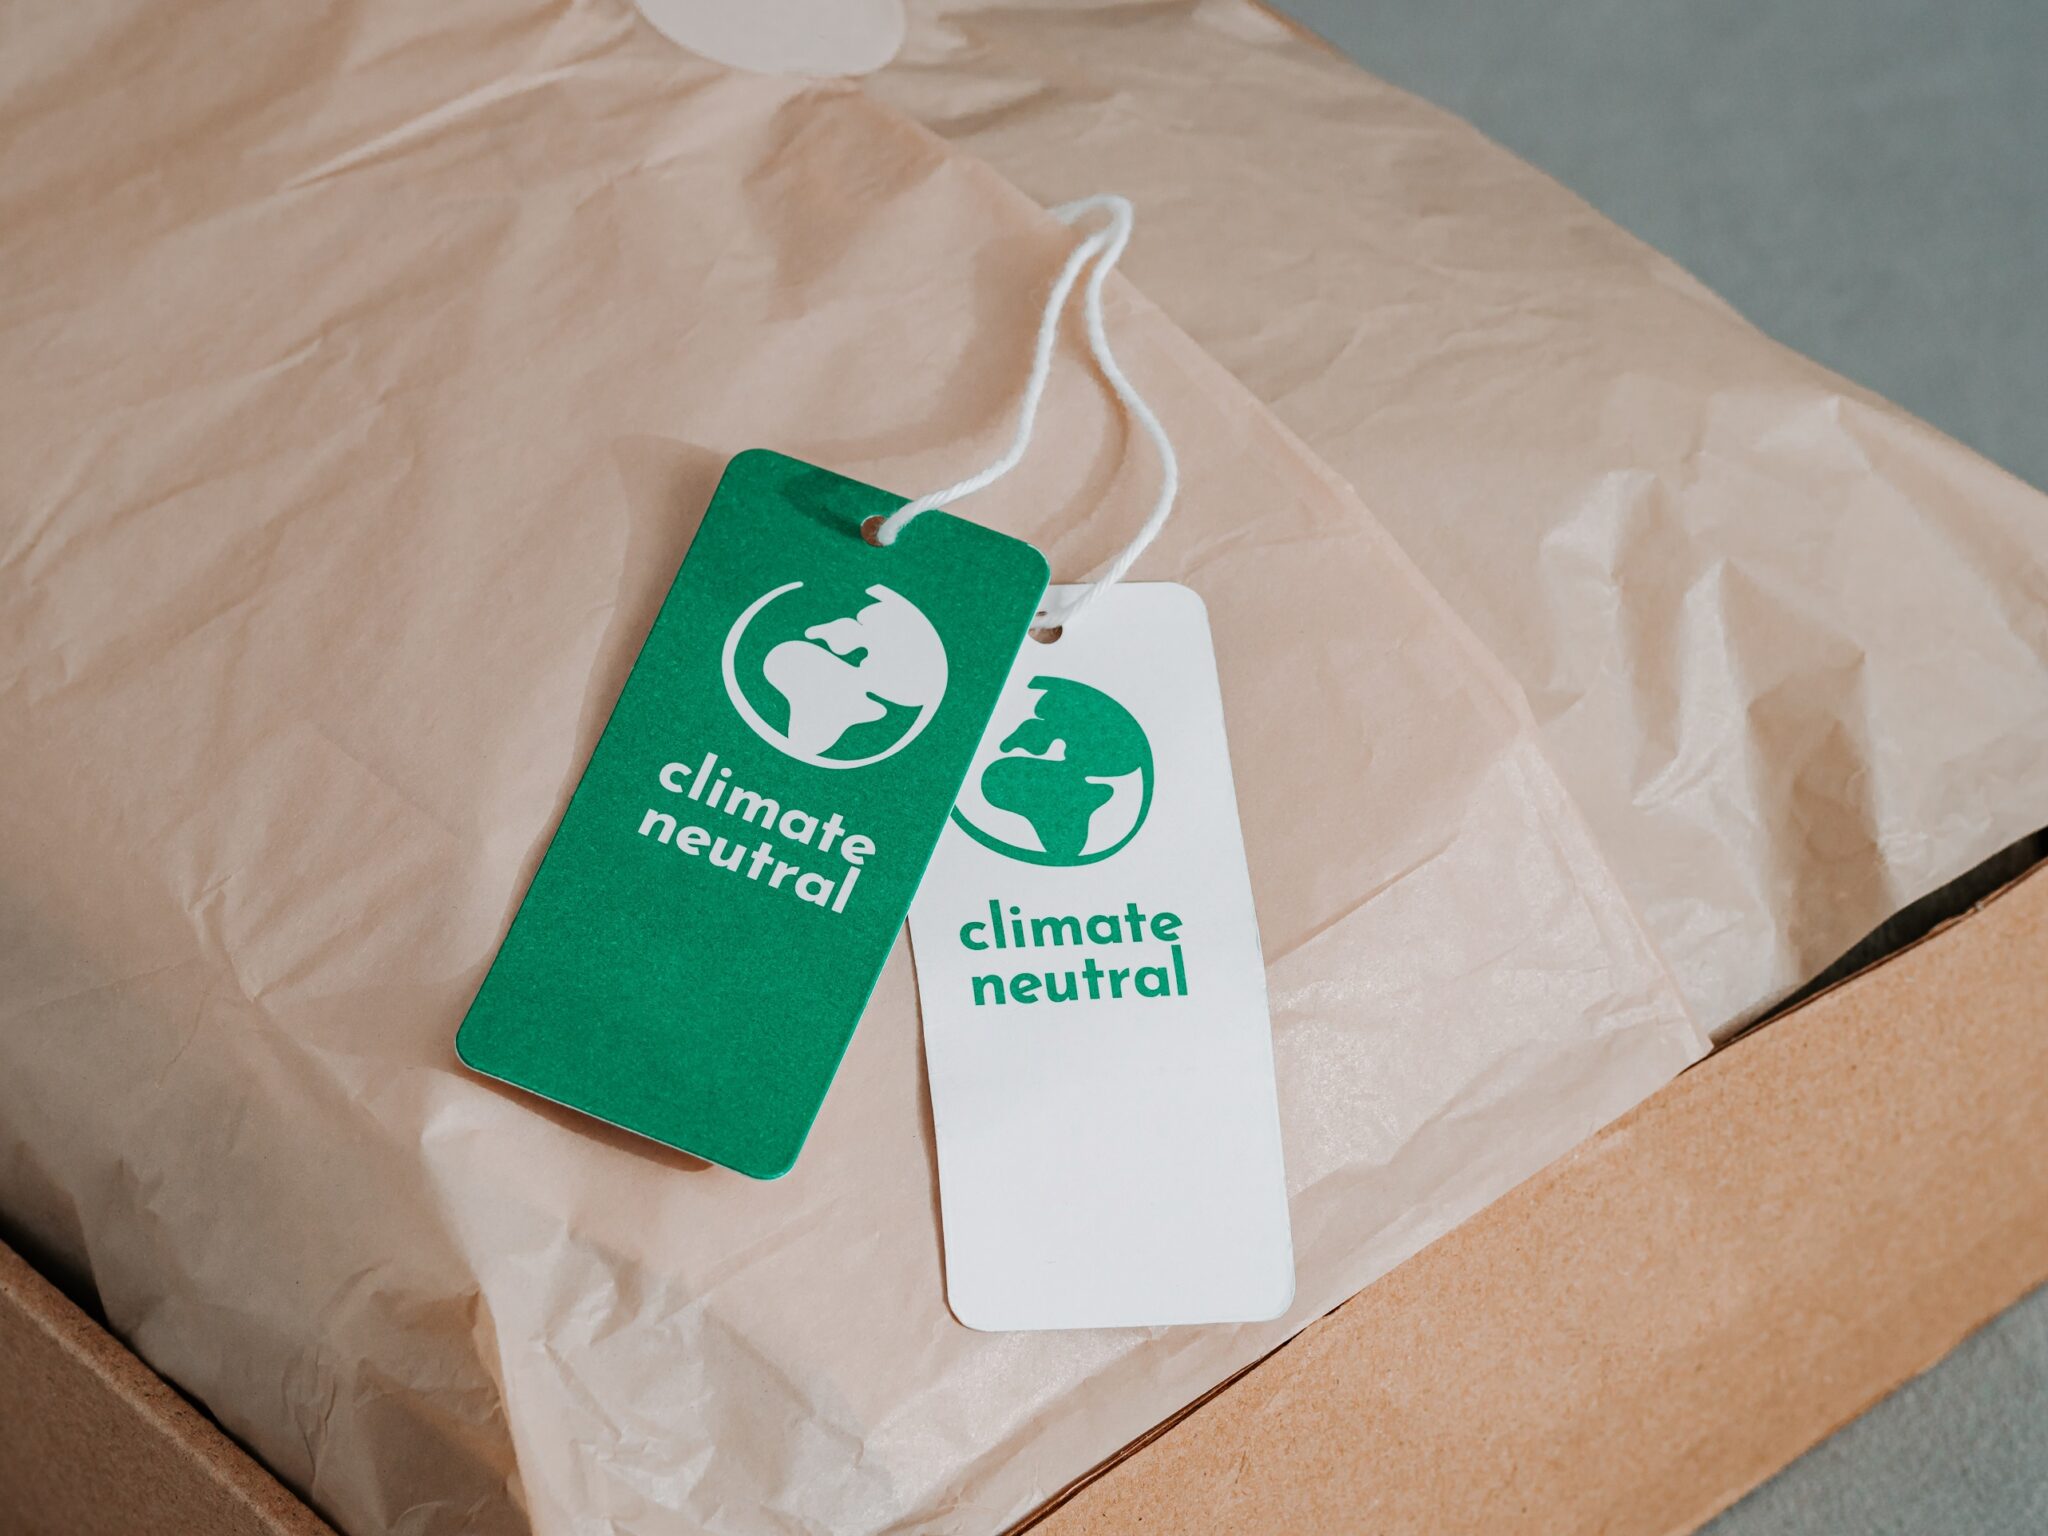 "Carbon Neutrality" or "Carbon Offset": What's Behind These Marketing Terms?